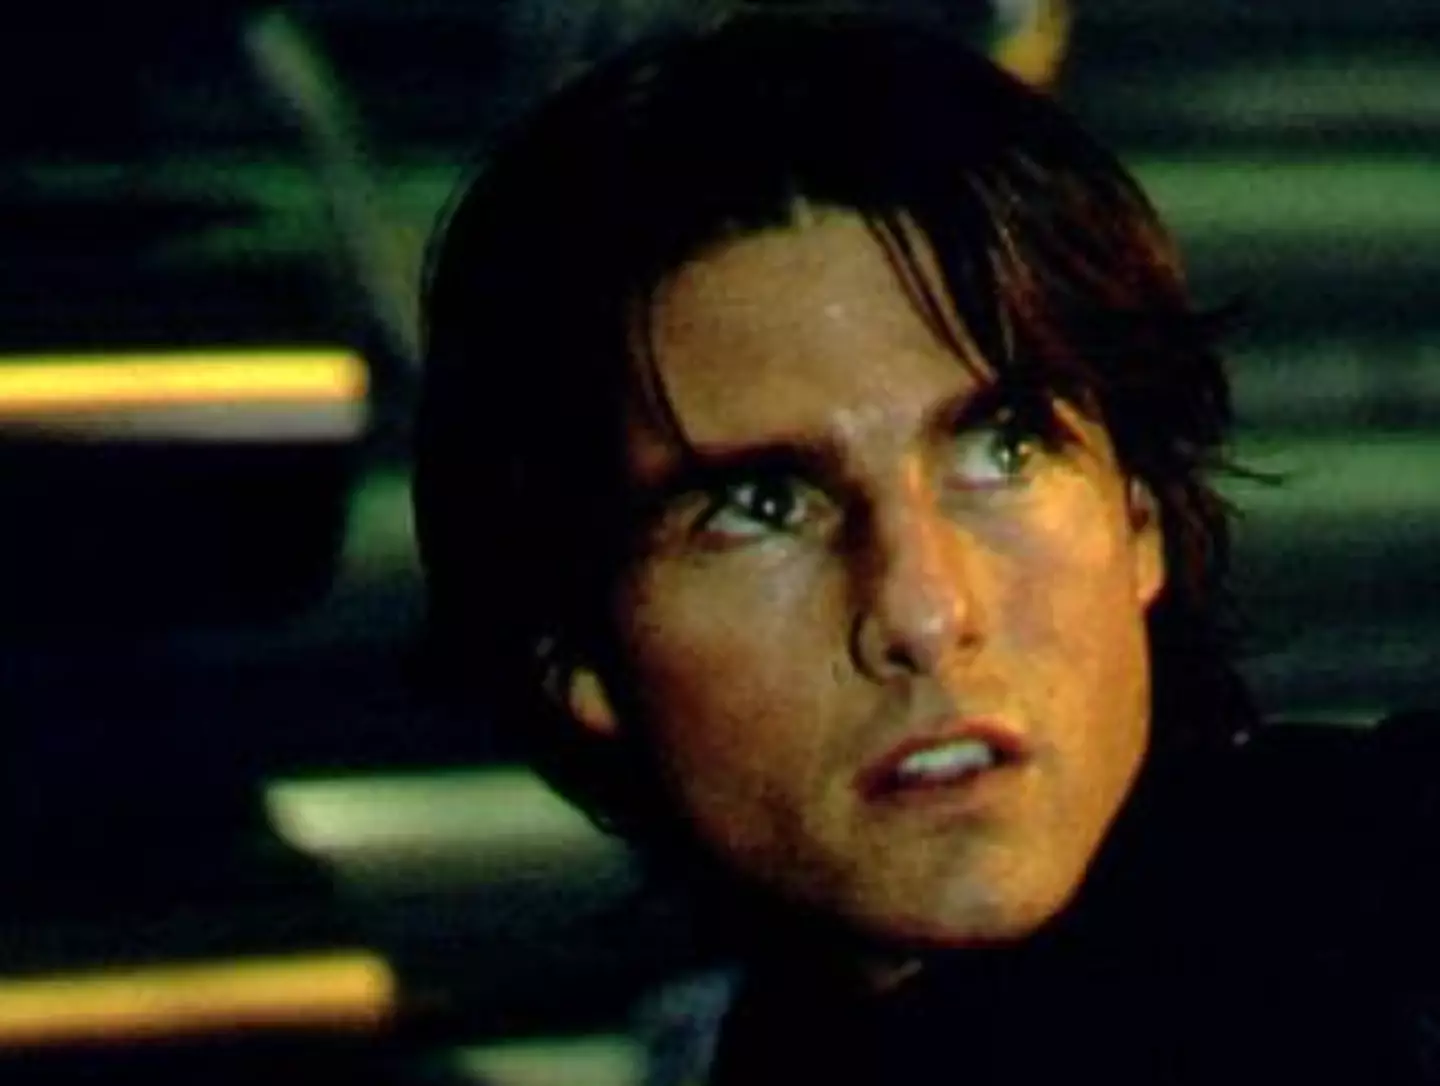 Tom Cruise returned as Ethan Hunt in Mission Impossible II.